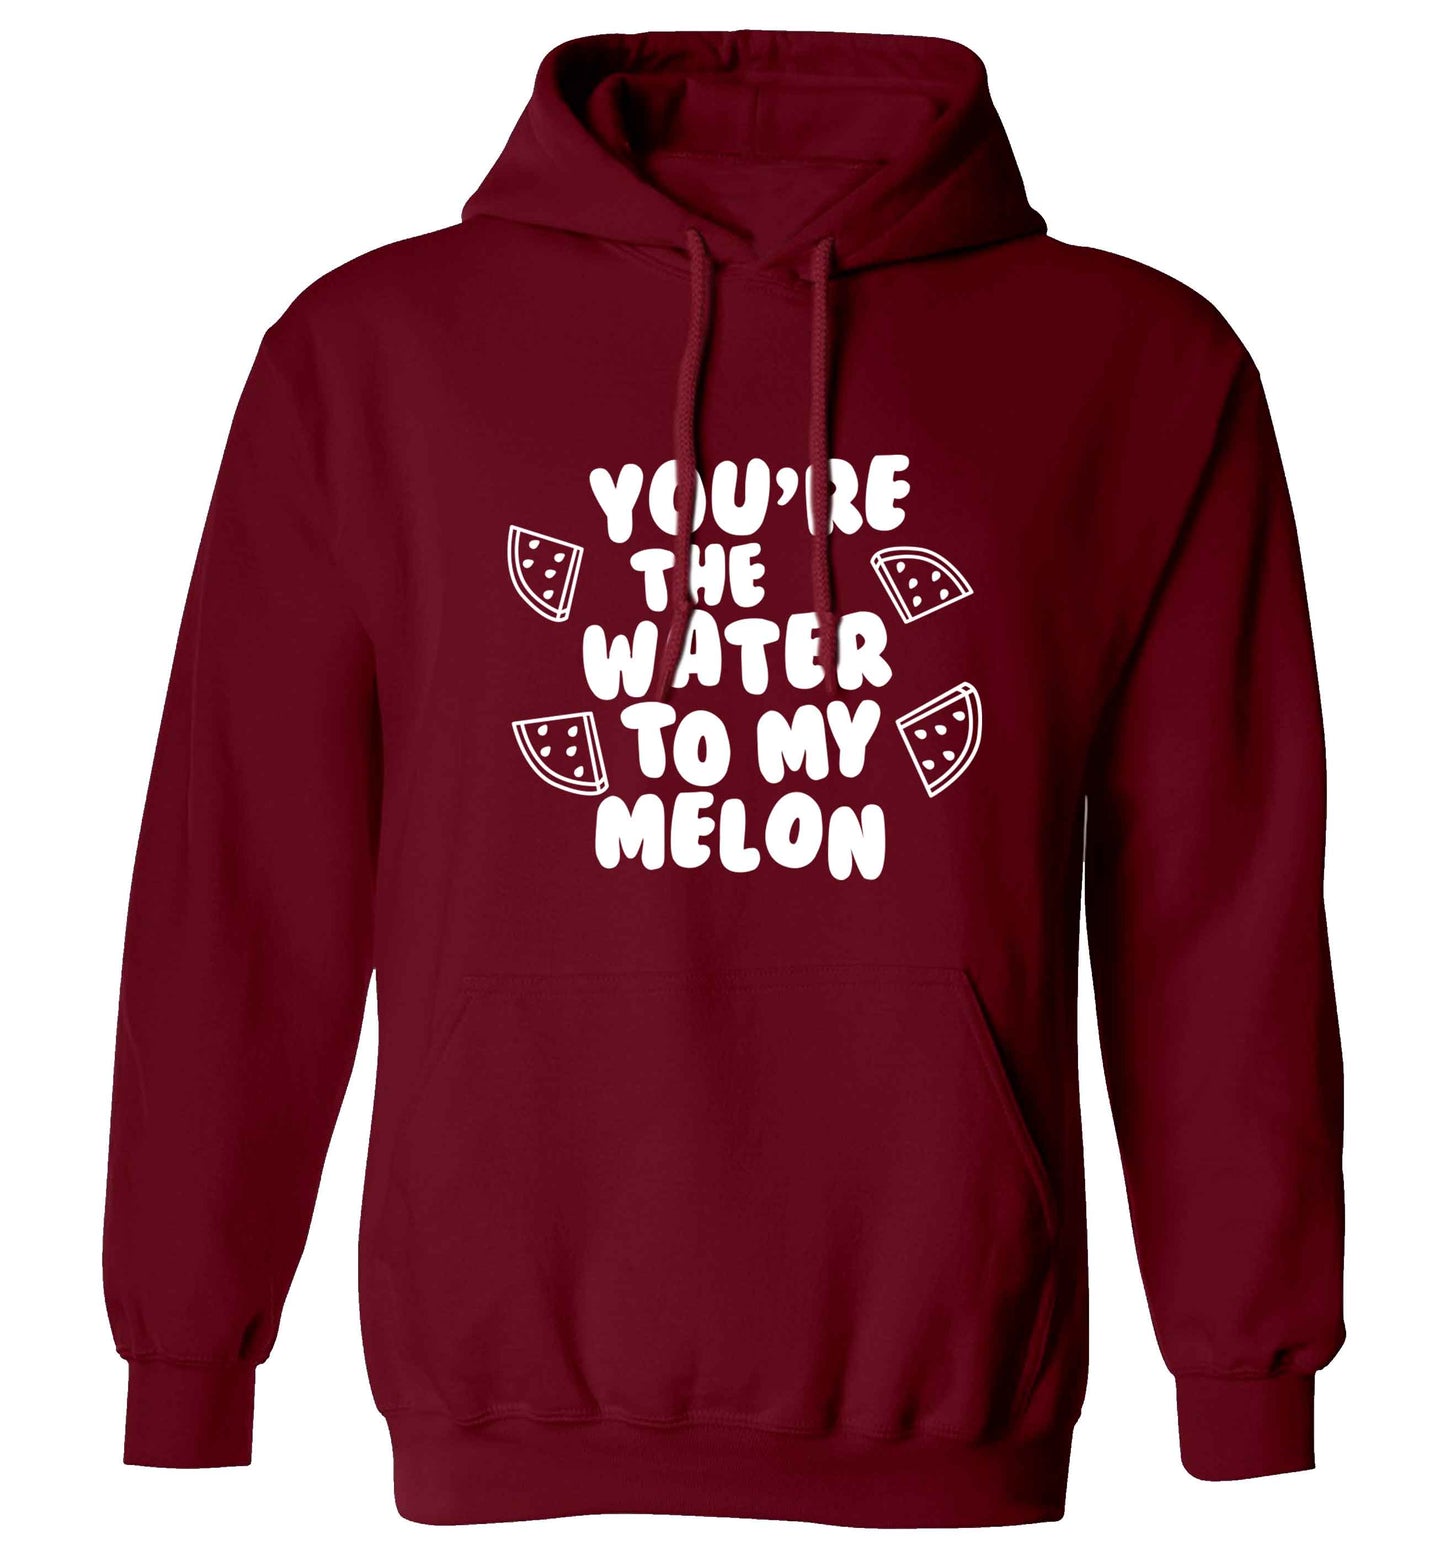 You're the water to my melon adults unisex maroon hoodie 2XL